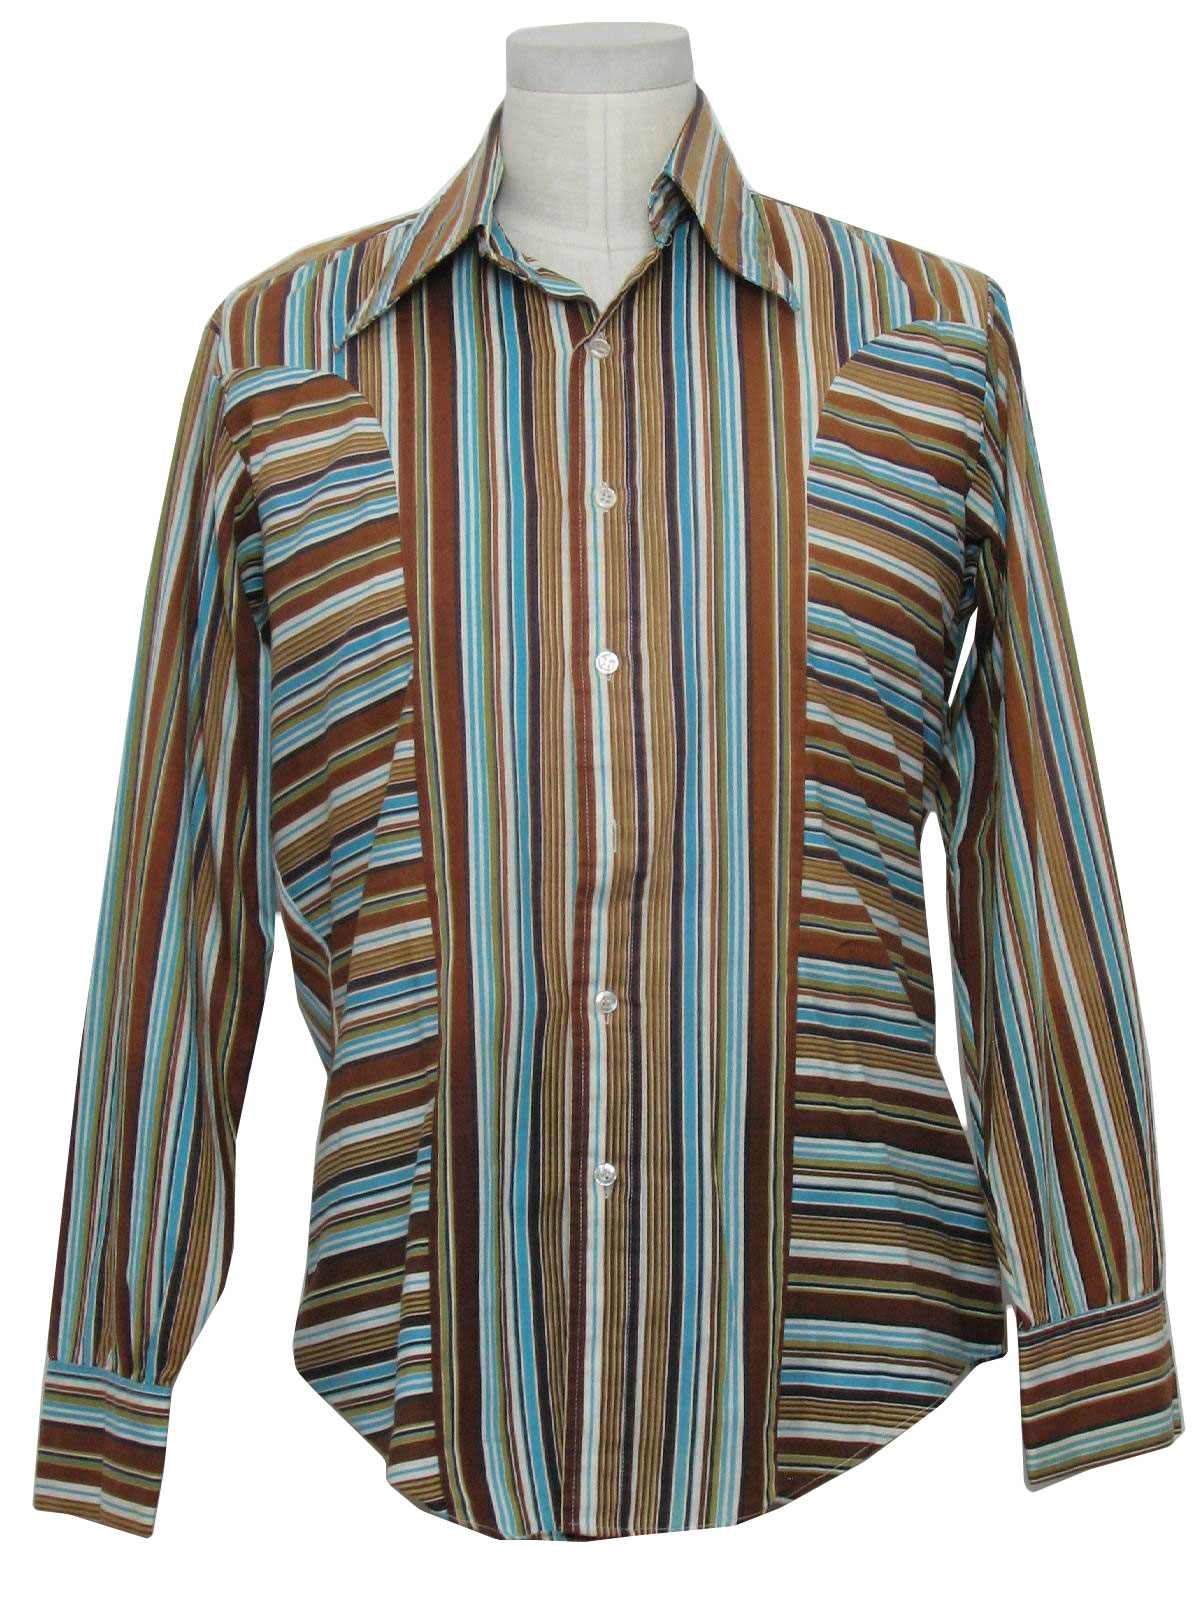 Retro Sixties Shirt: Late 60s -Body Shirt by Campus- Mens white ...